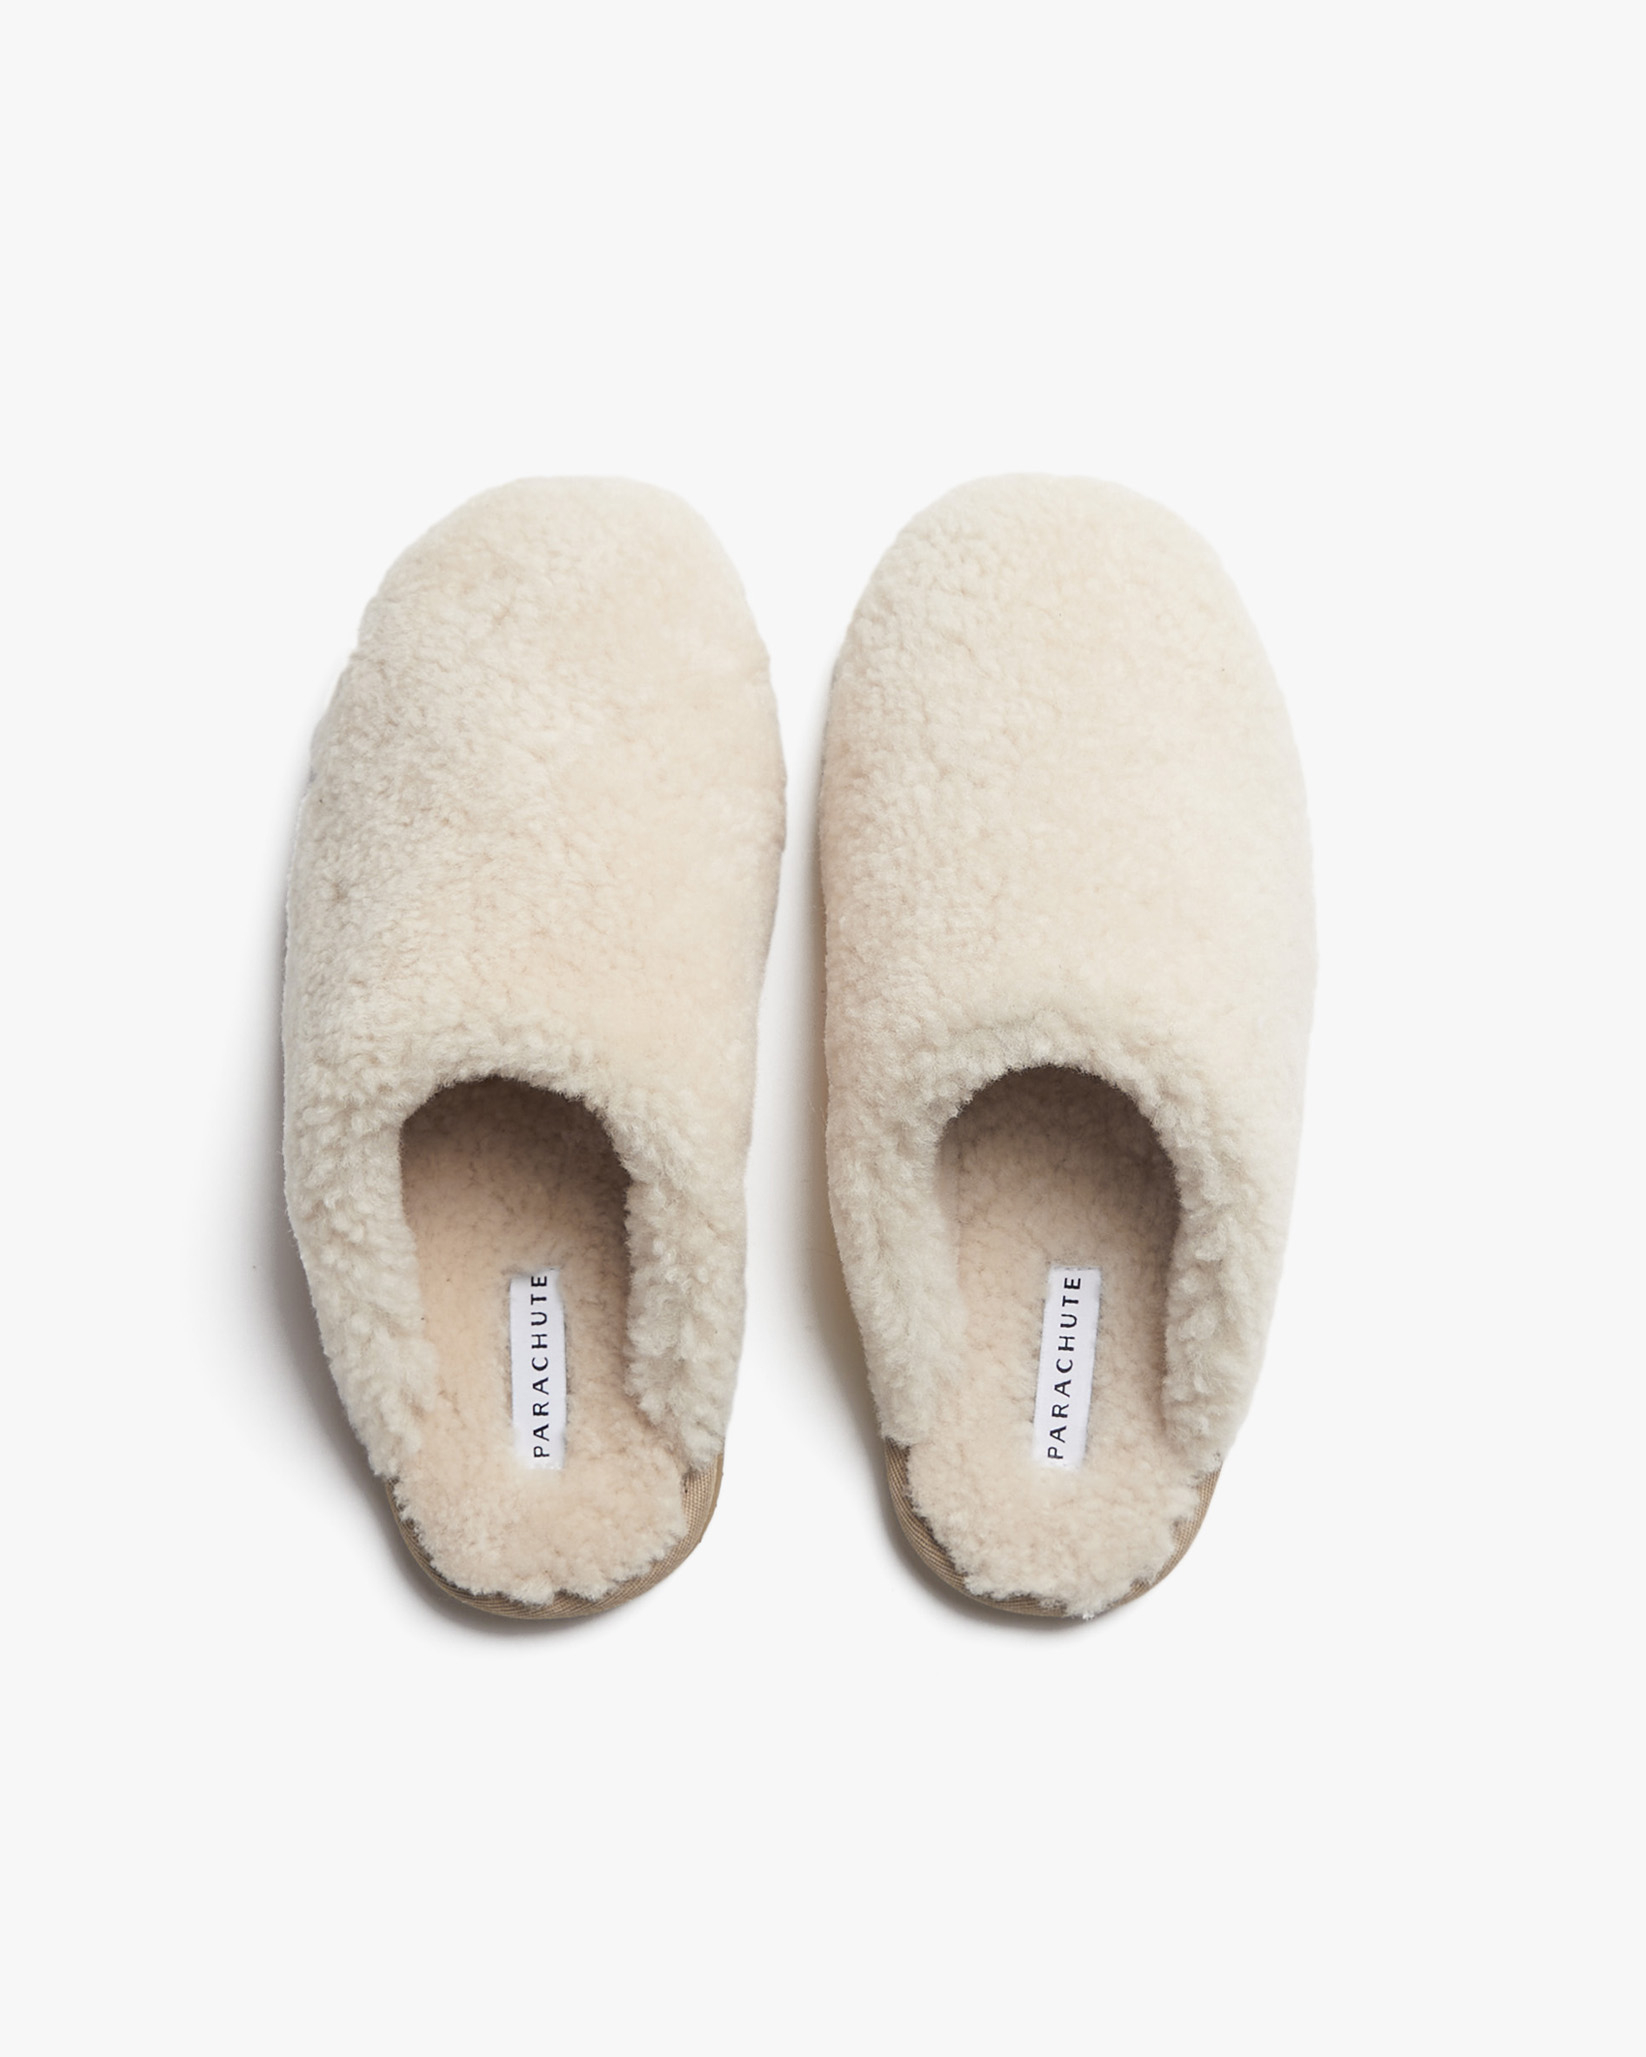 Unisex Shearling Wool Clogs in Natural Size XL | Parachute